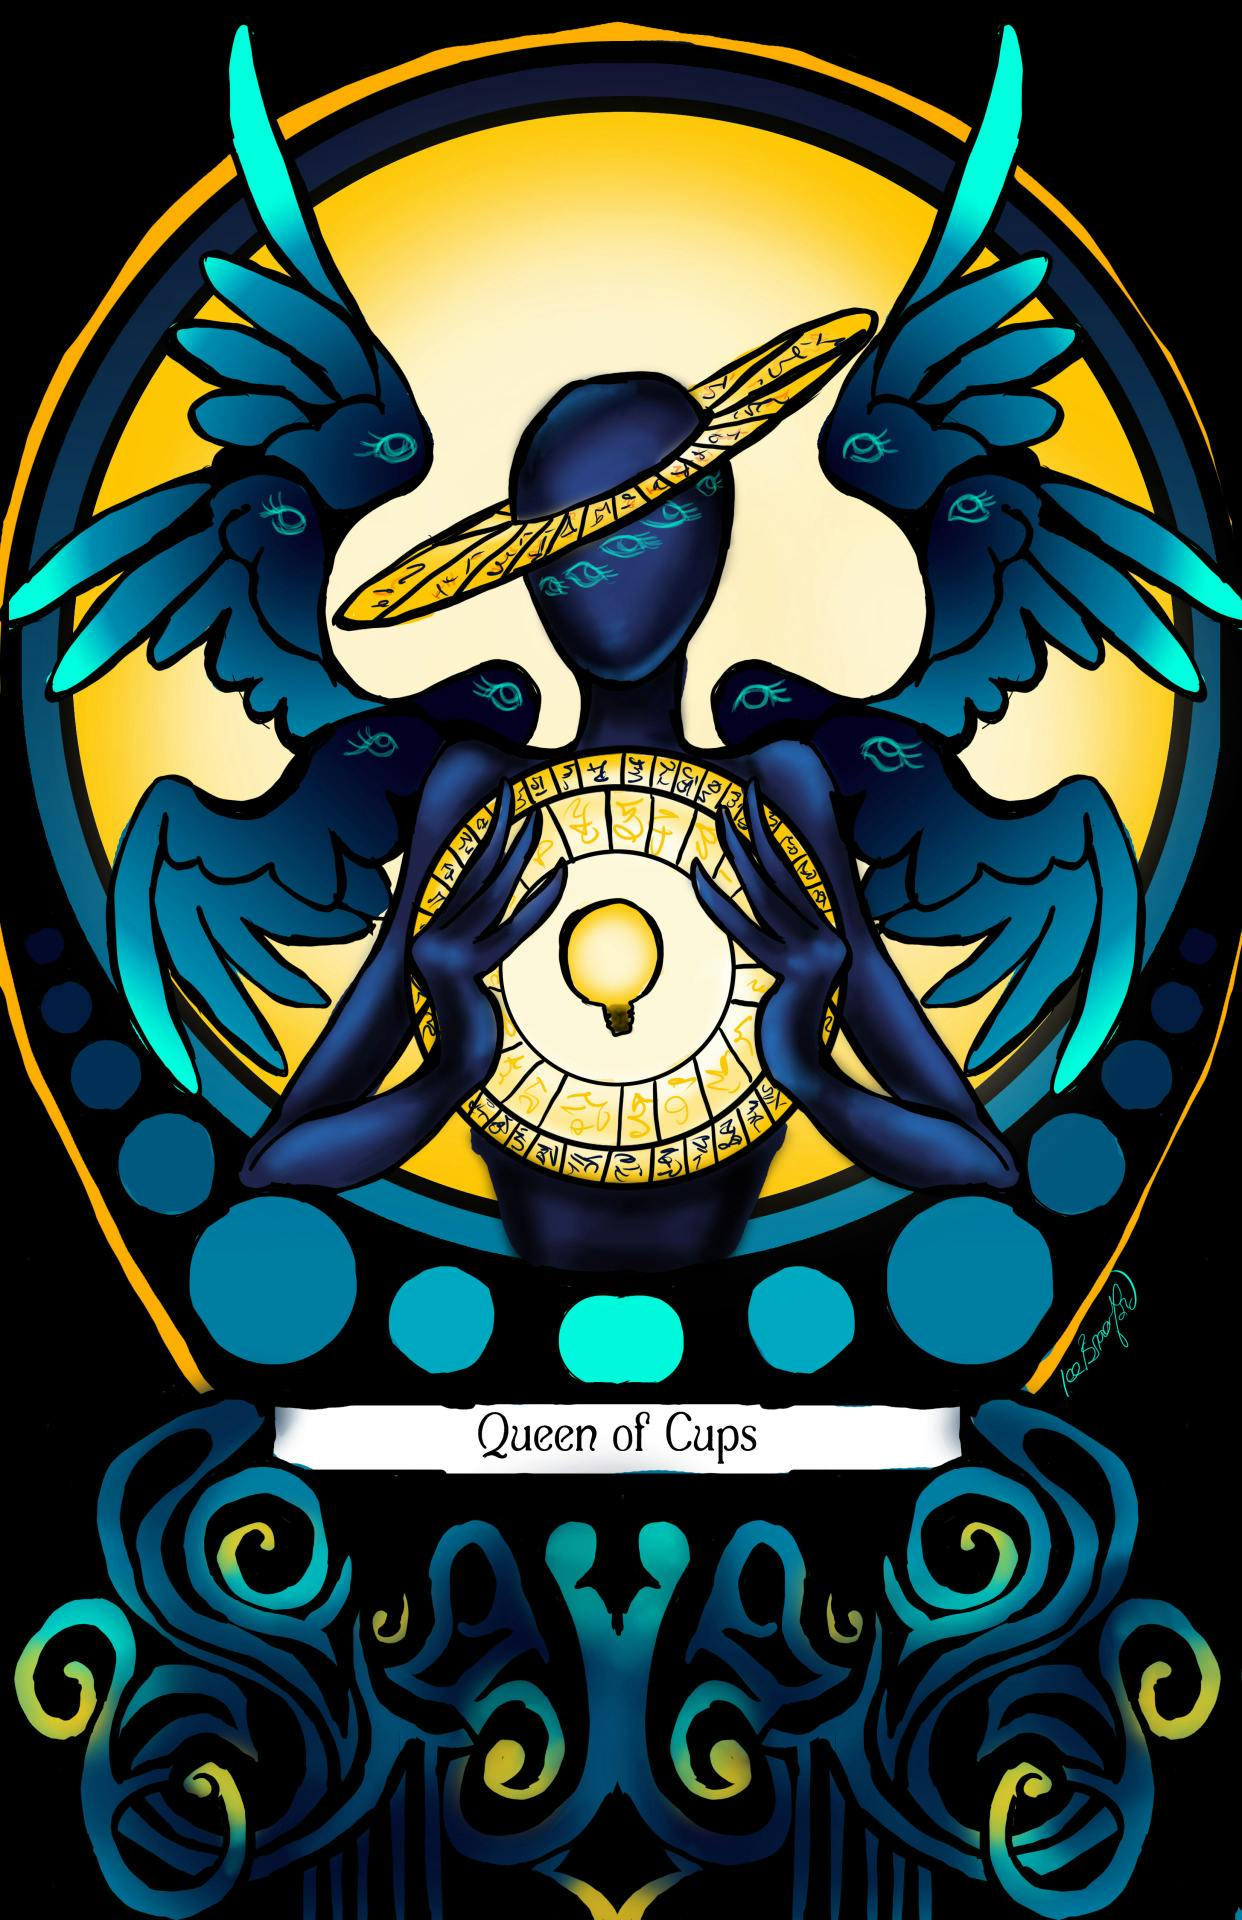 Tarot card for Welcome to Night Vale featuring the character Erika as the Queen of Cups